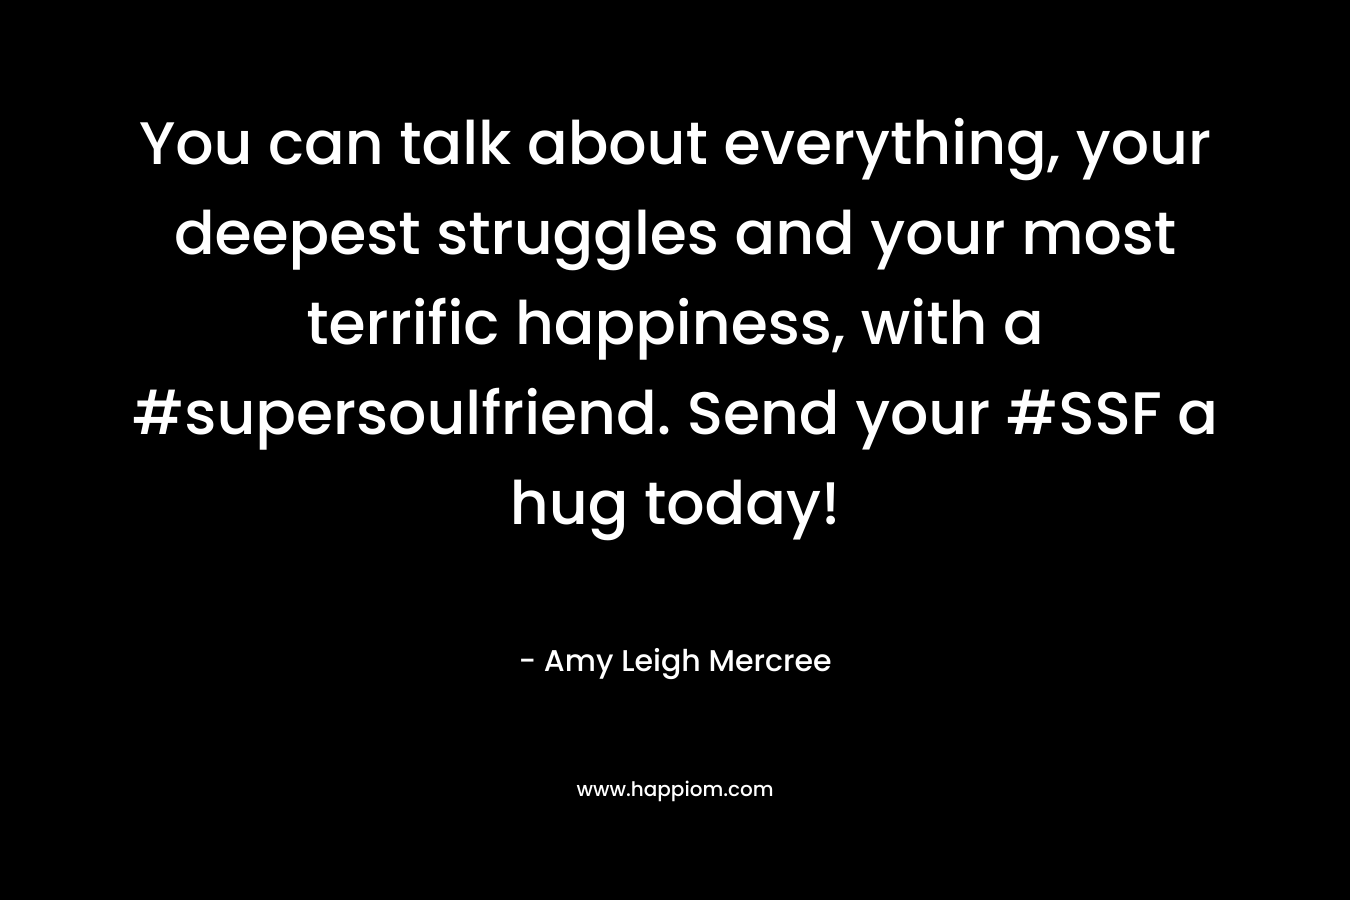 You can talk about everything, your deepest struggles and your most terrific happiness, with a #supersoulfriend. Send your #SSF a hug today! – Amy Leigh Mercree